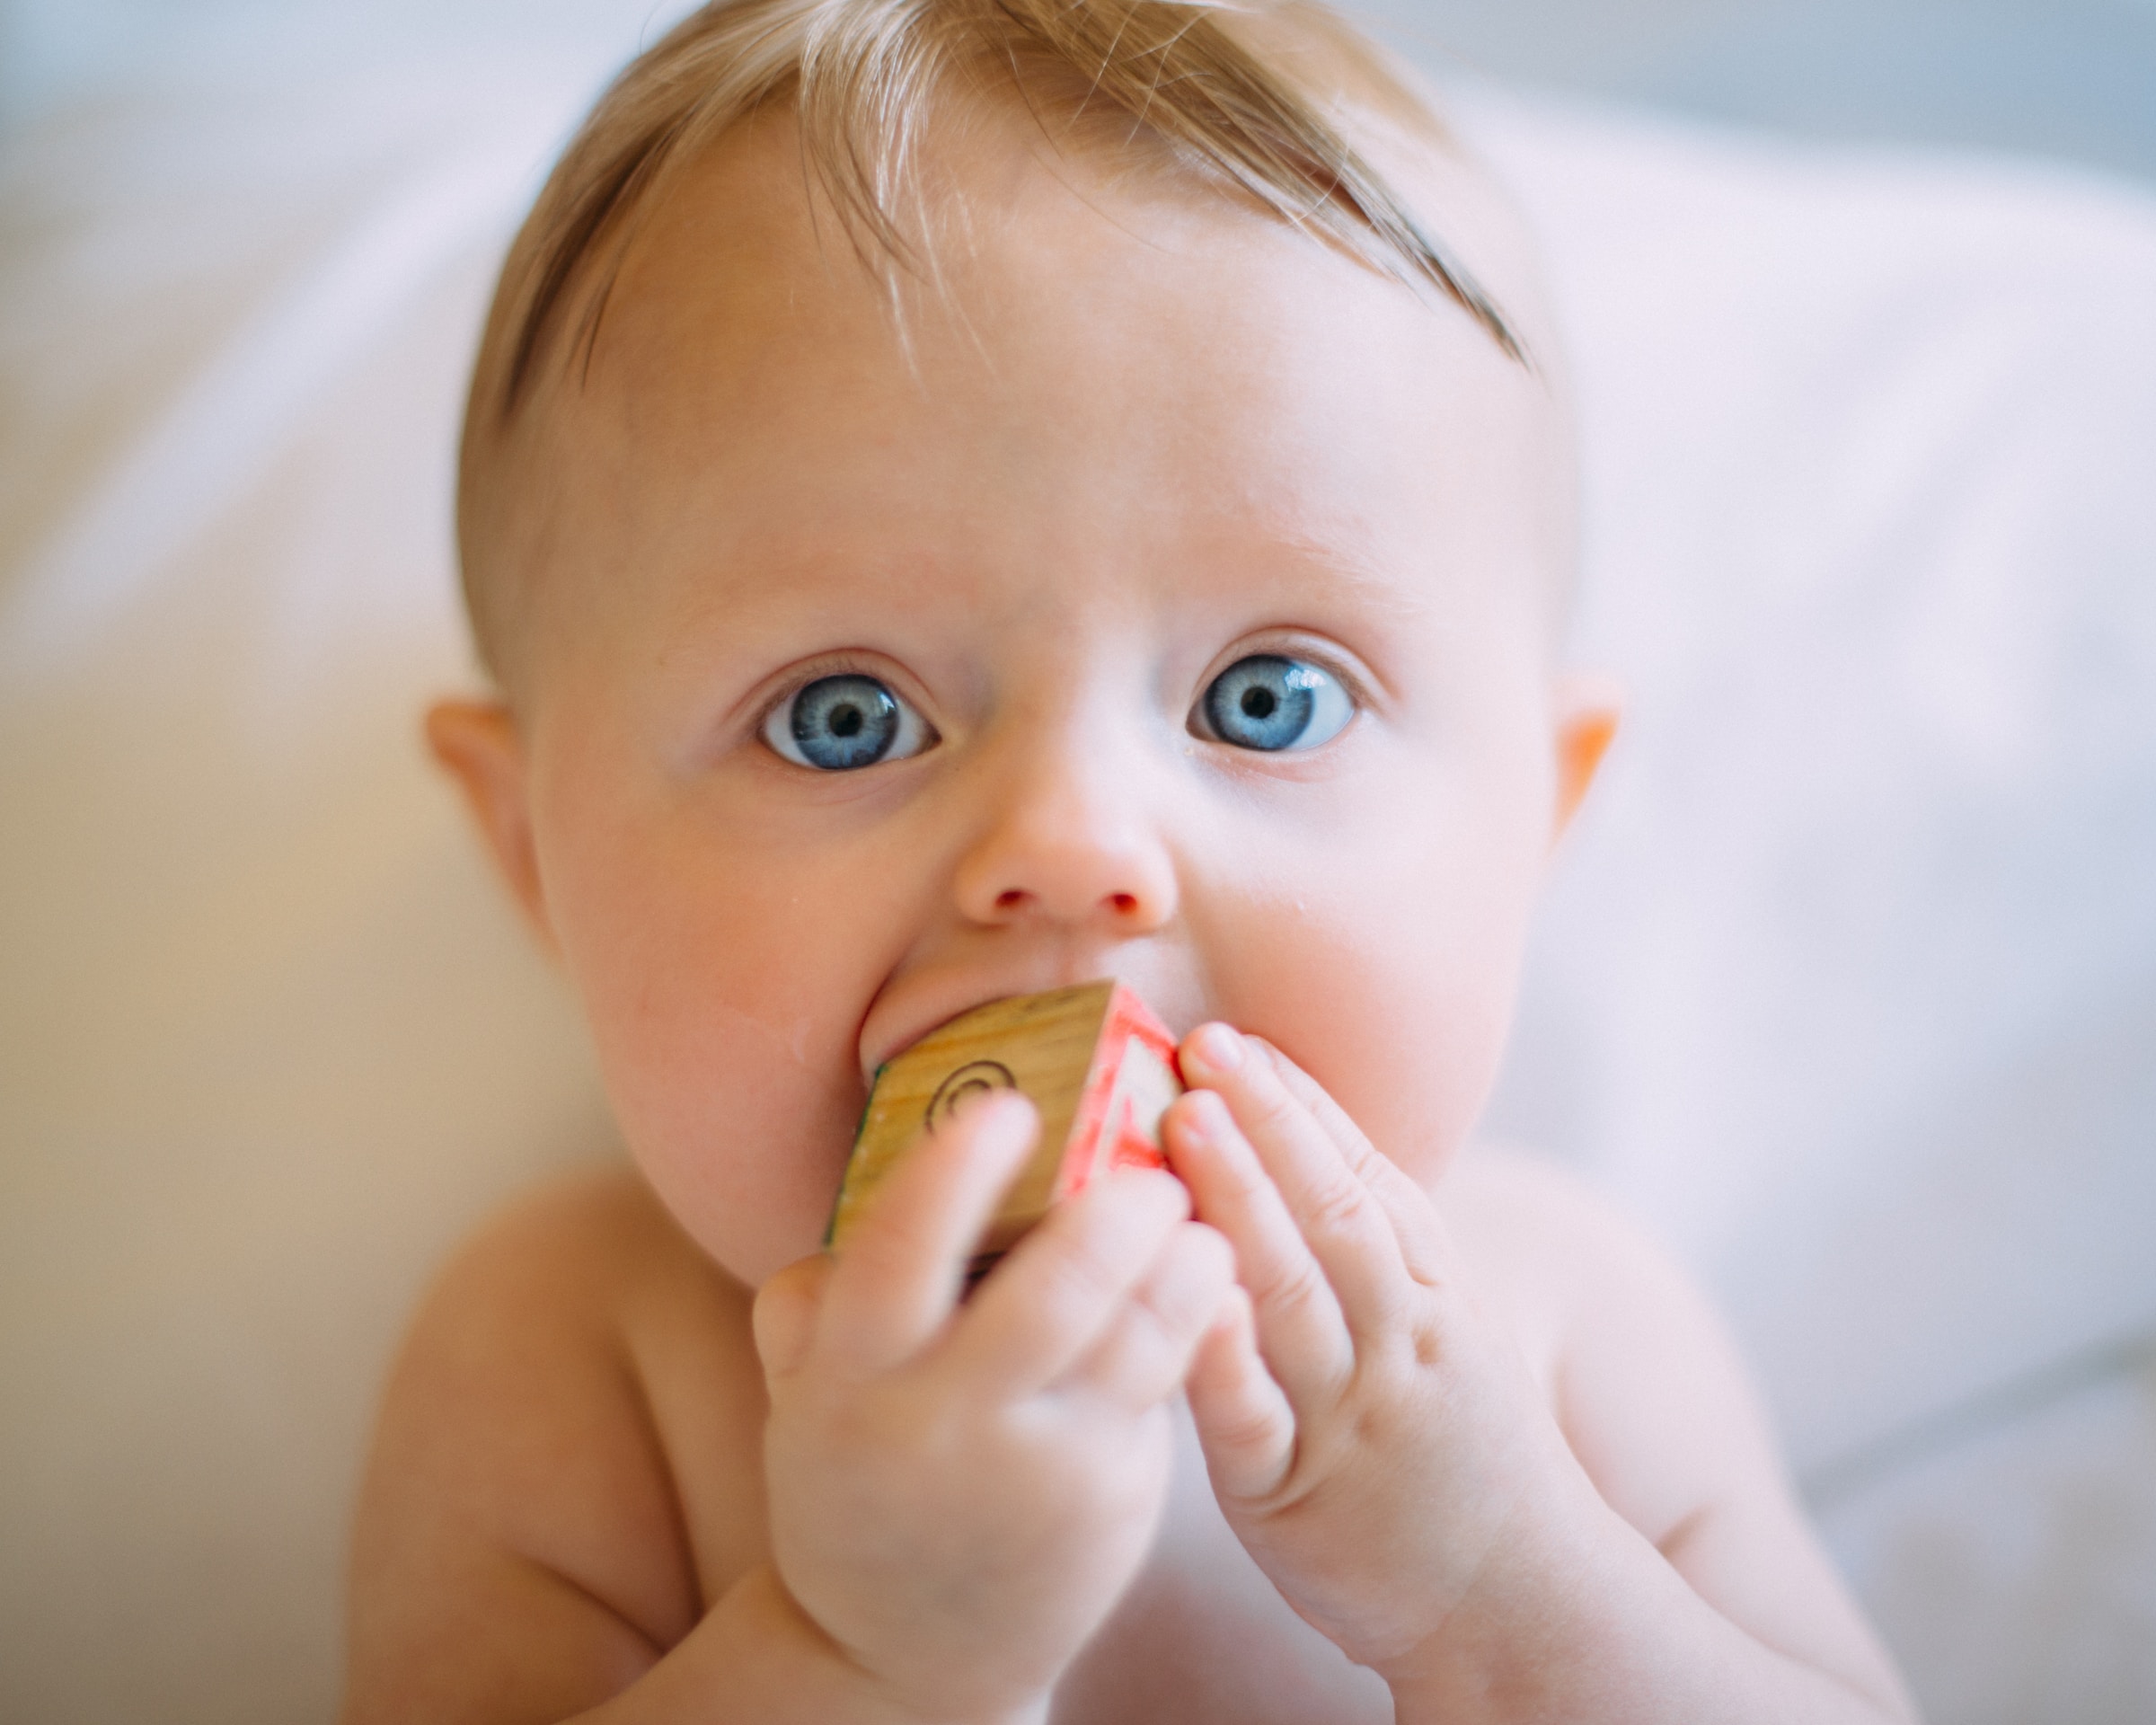 Baby with blue eyes. | Source: Unsplash